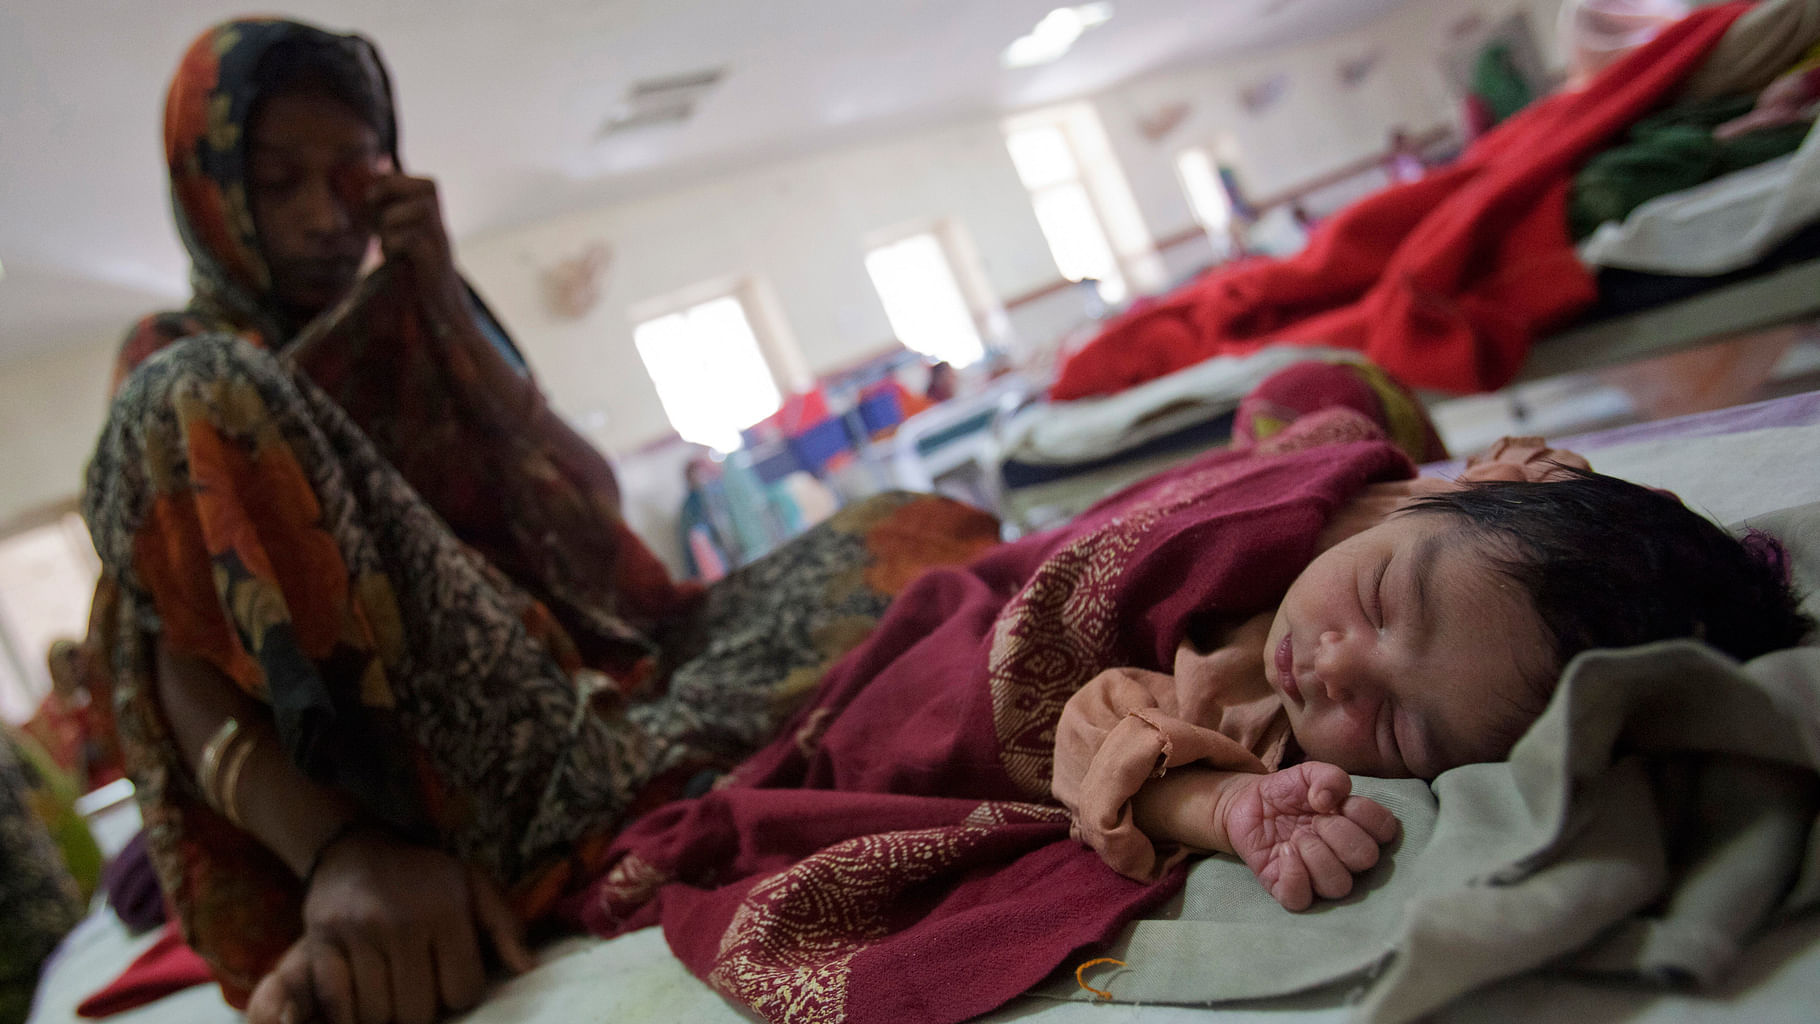 A woman sits on a bed along with her newborn baby at a district hospital in Shivpuri, Madhya Pradesh. (Photo: Reuters)